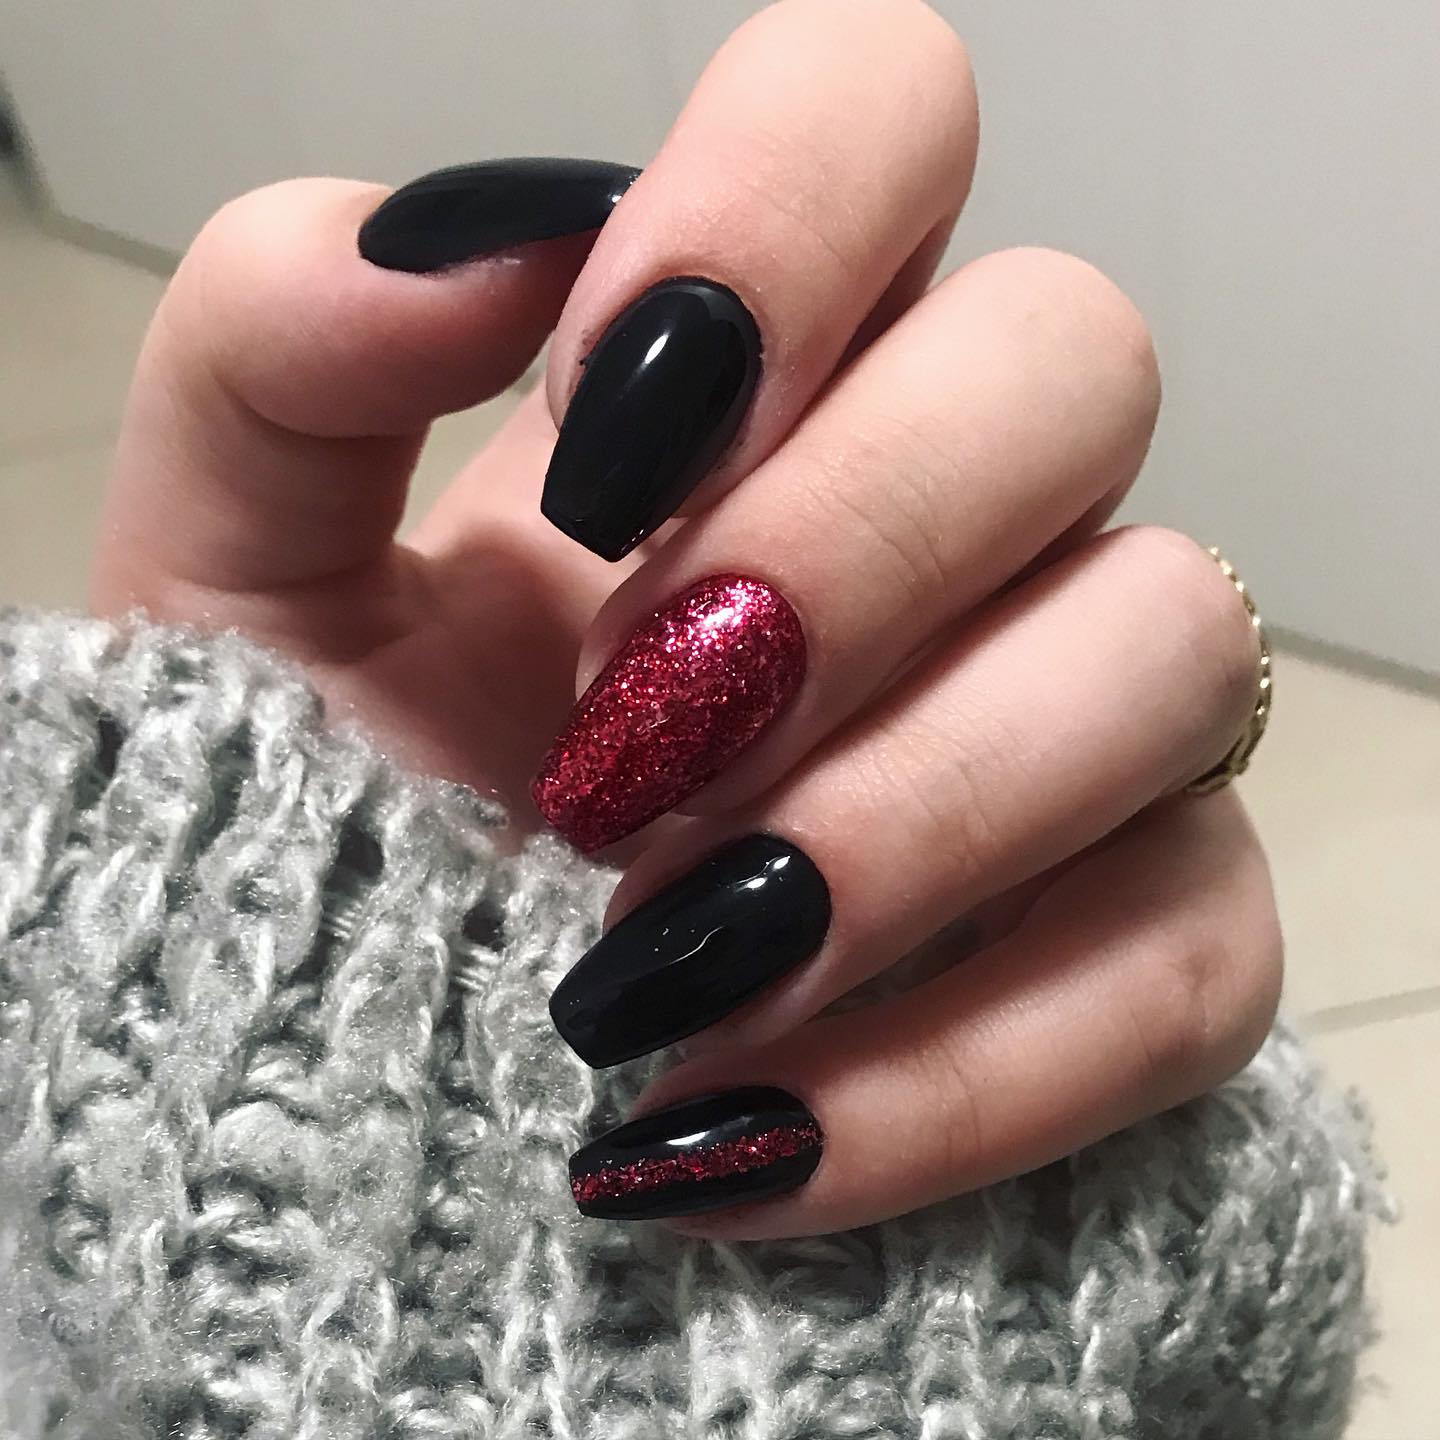  Glittered accent nails have always been a favourite one. If you think so, red glitters are here to make your nails shine. For your little finger, you can draw a red line on your black nail polish.